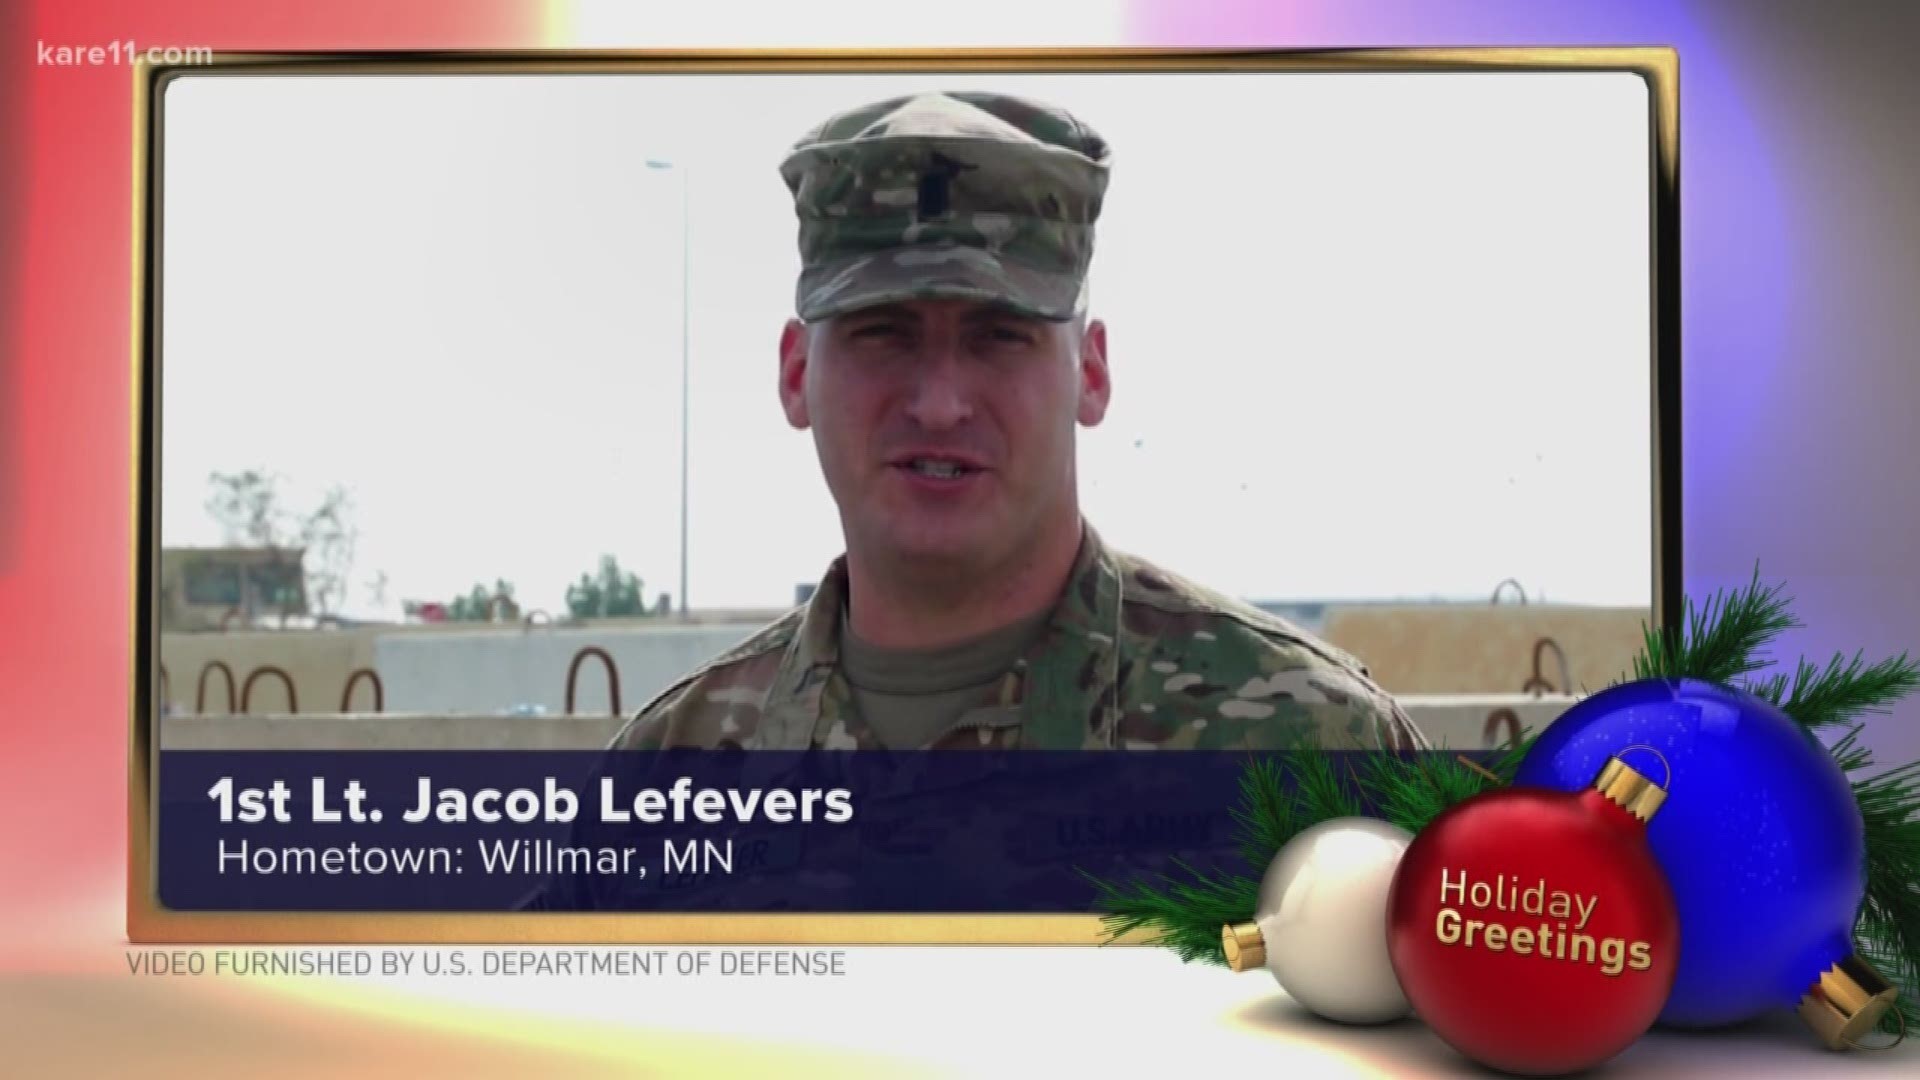 1st Lt. Jacob Lefever from Willmar, Minn. sends his holiday greetings.